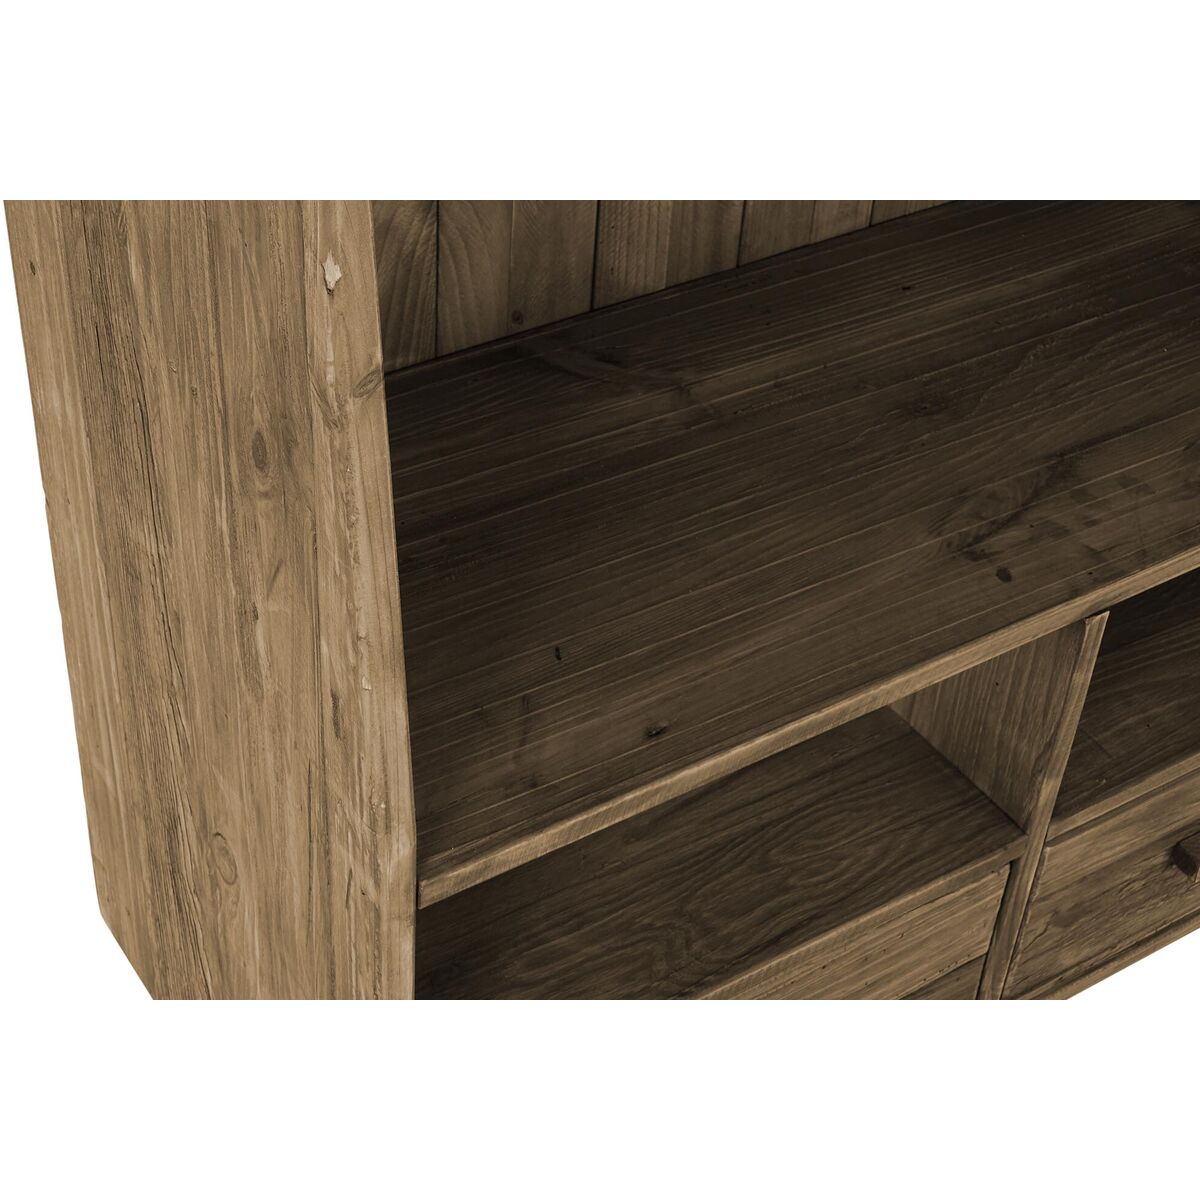 Shelves DKD Home Decor Natural Recycled Wood (90 x 40 x 182 cm)